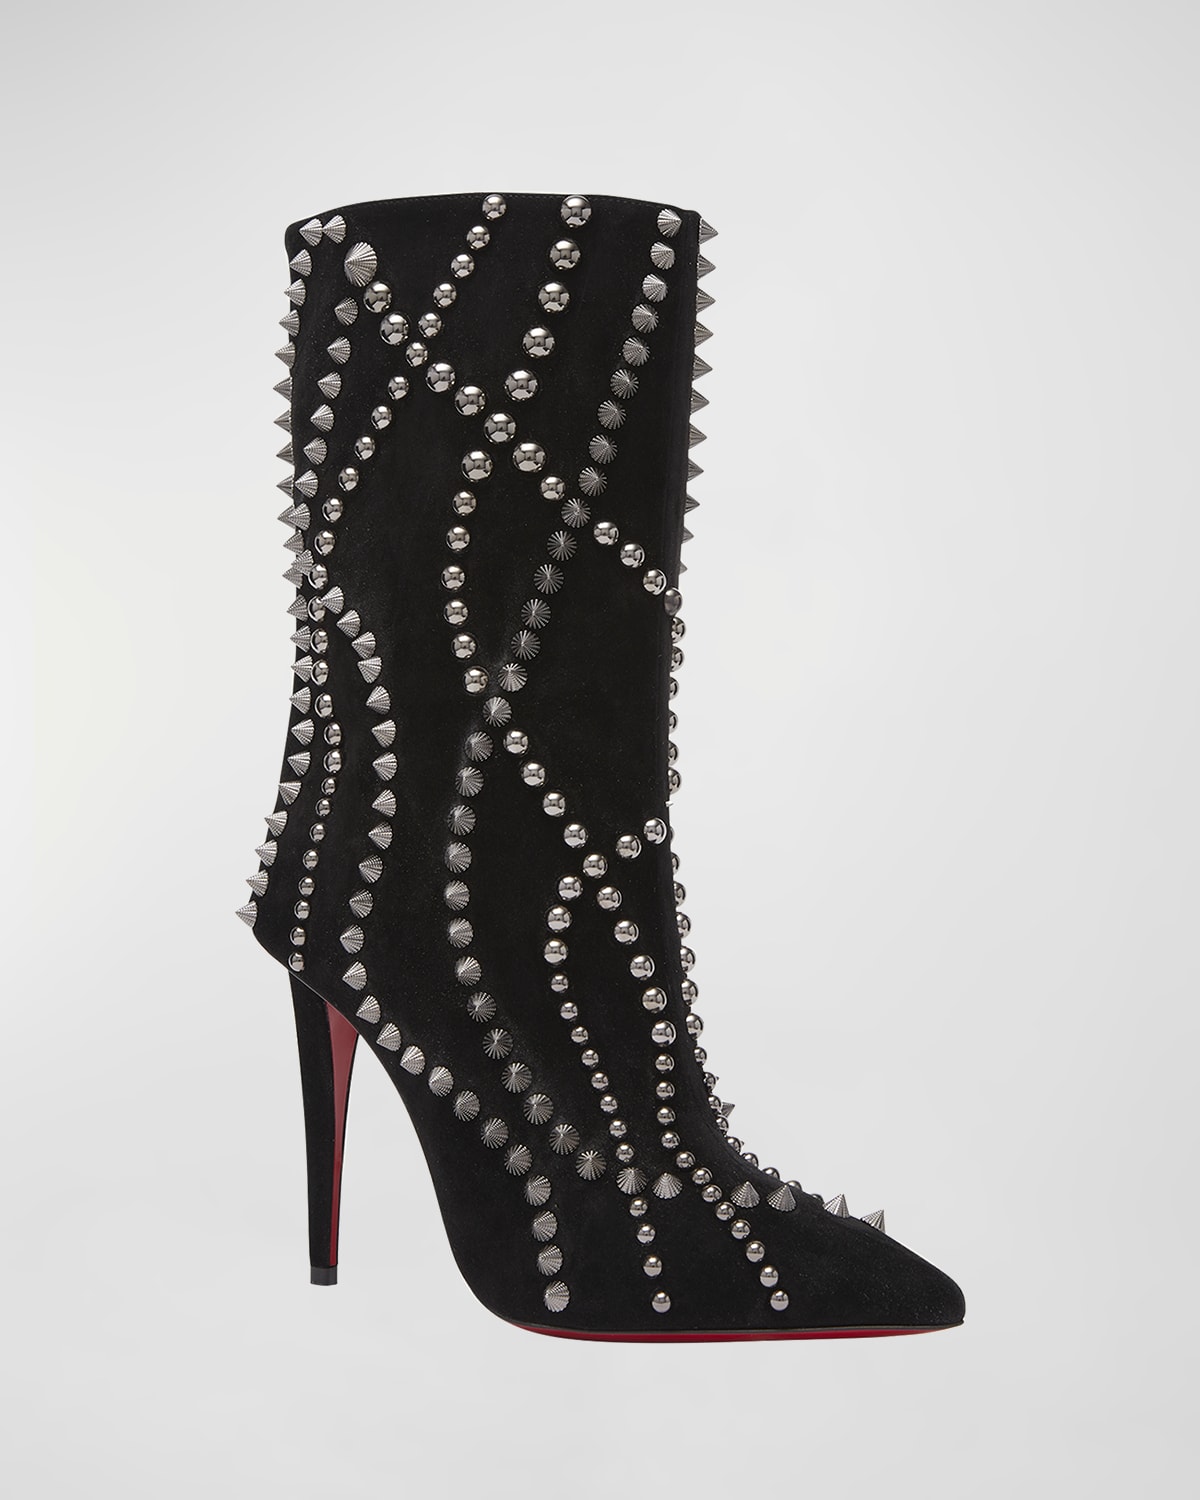 Christian Louboutin Adoxa Stretch Suede Red-Sole Booties | Neiman Marcus